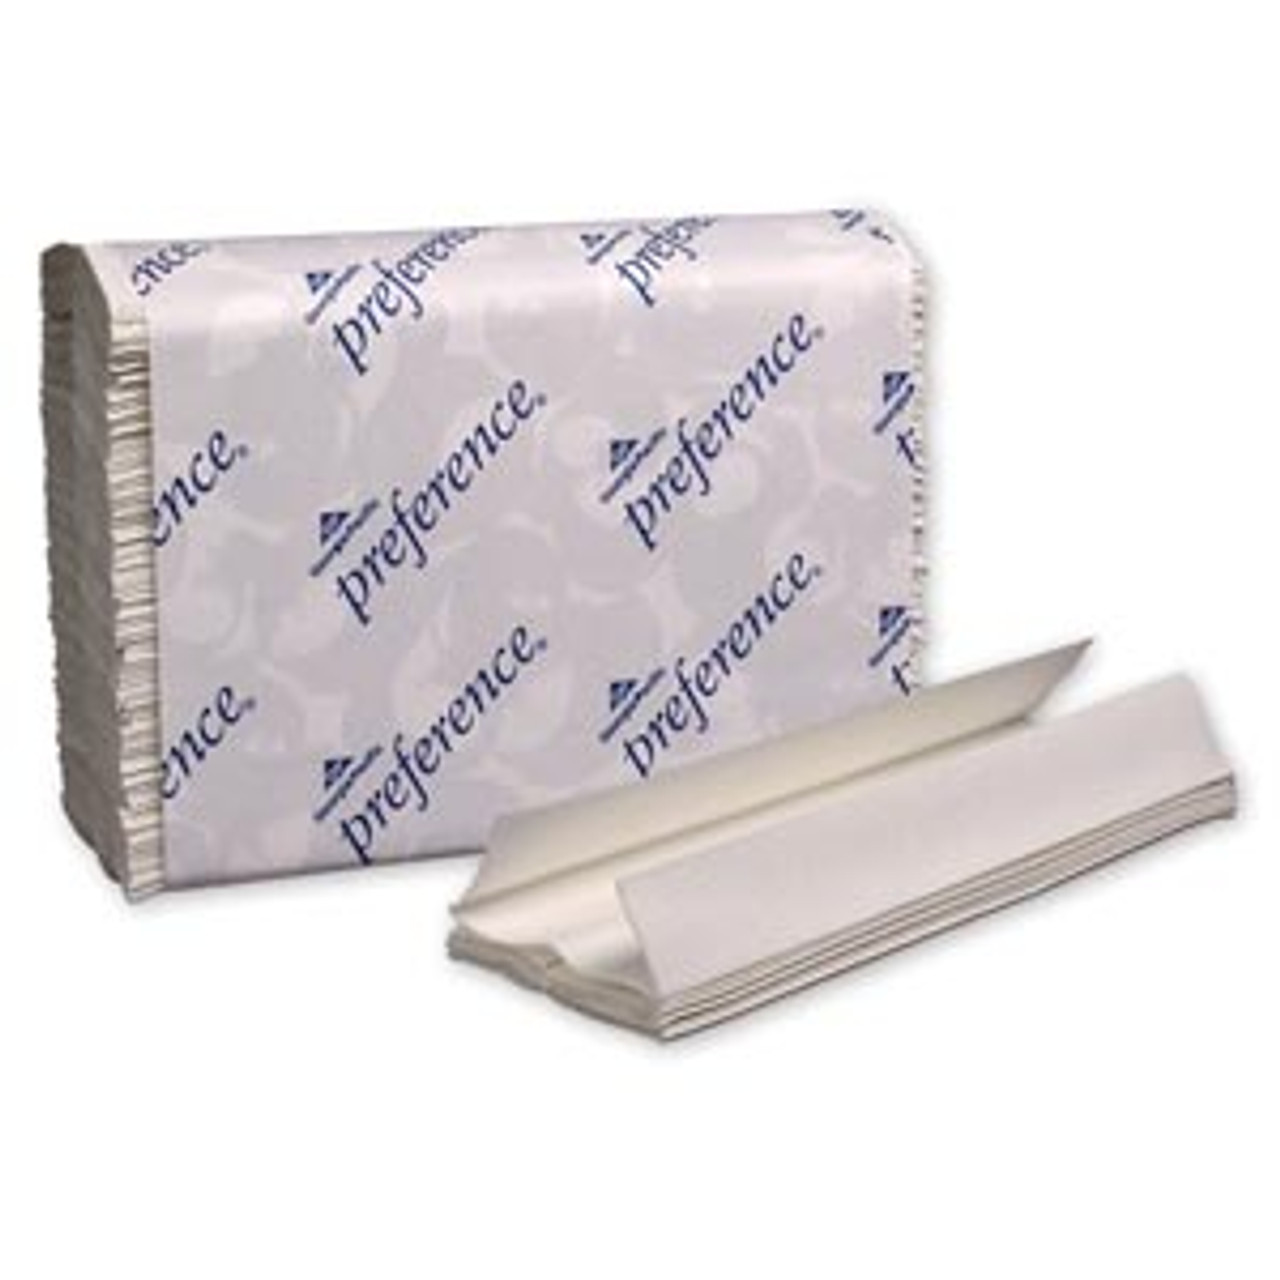 Preference® C-old Paper Towels, Paper Band, White, 10 1/4 x 13-1/2  Sheets, 200 per pack, 12 packs per case